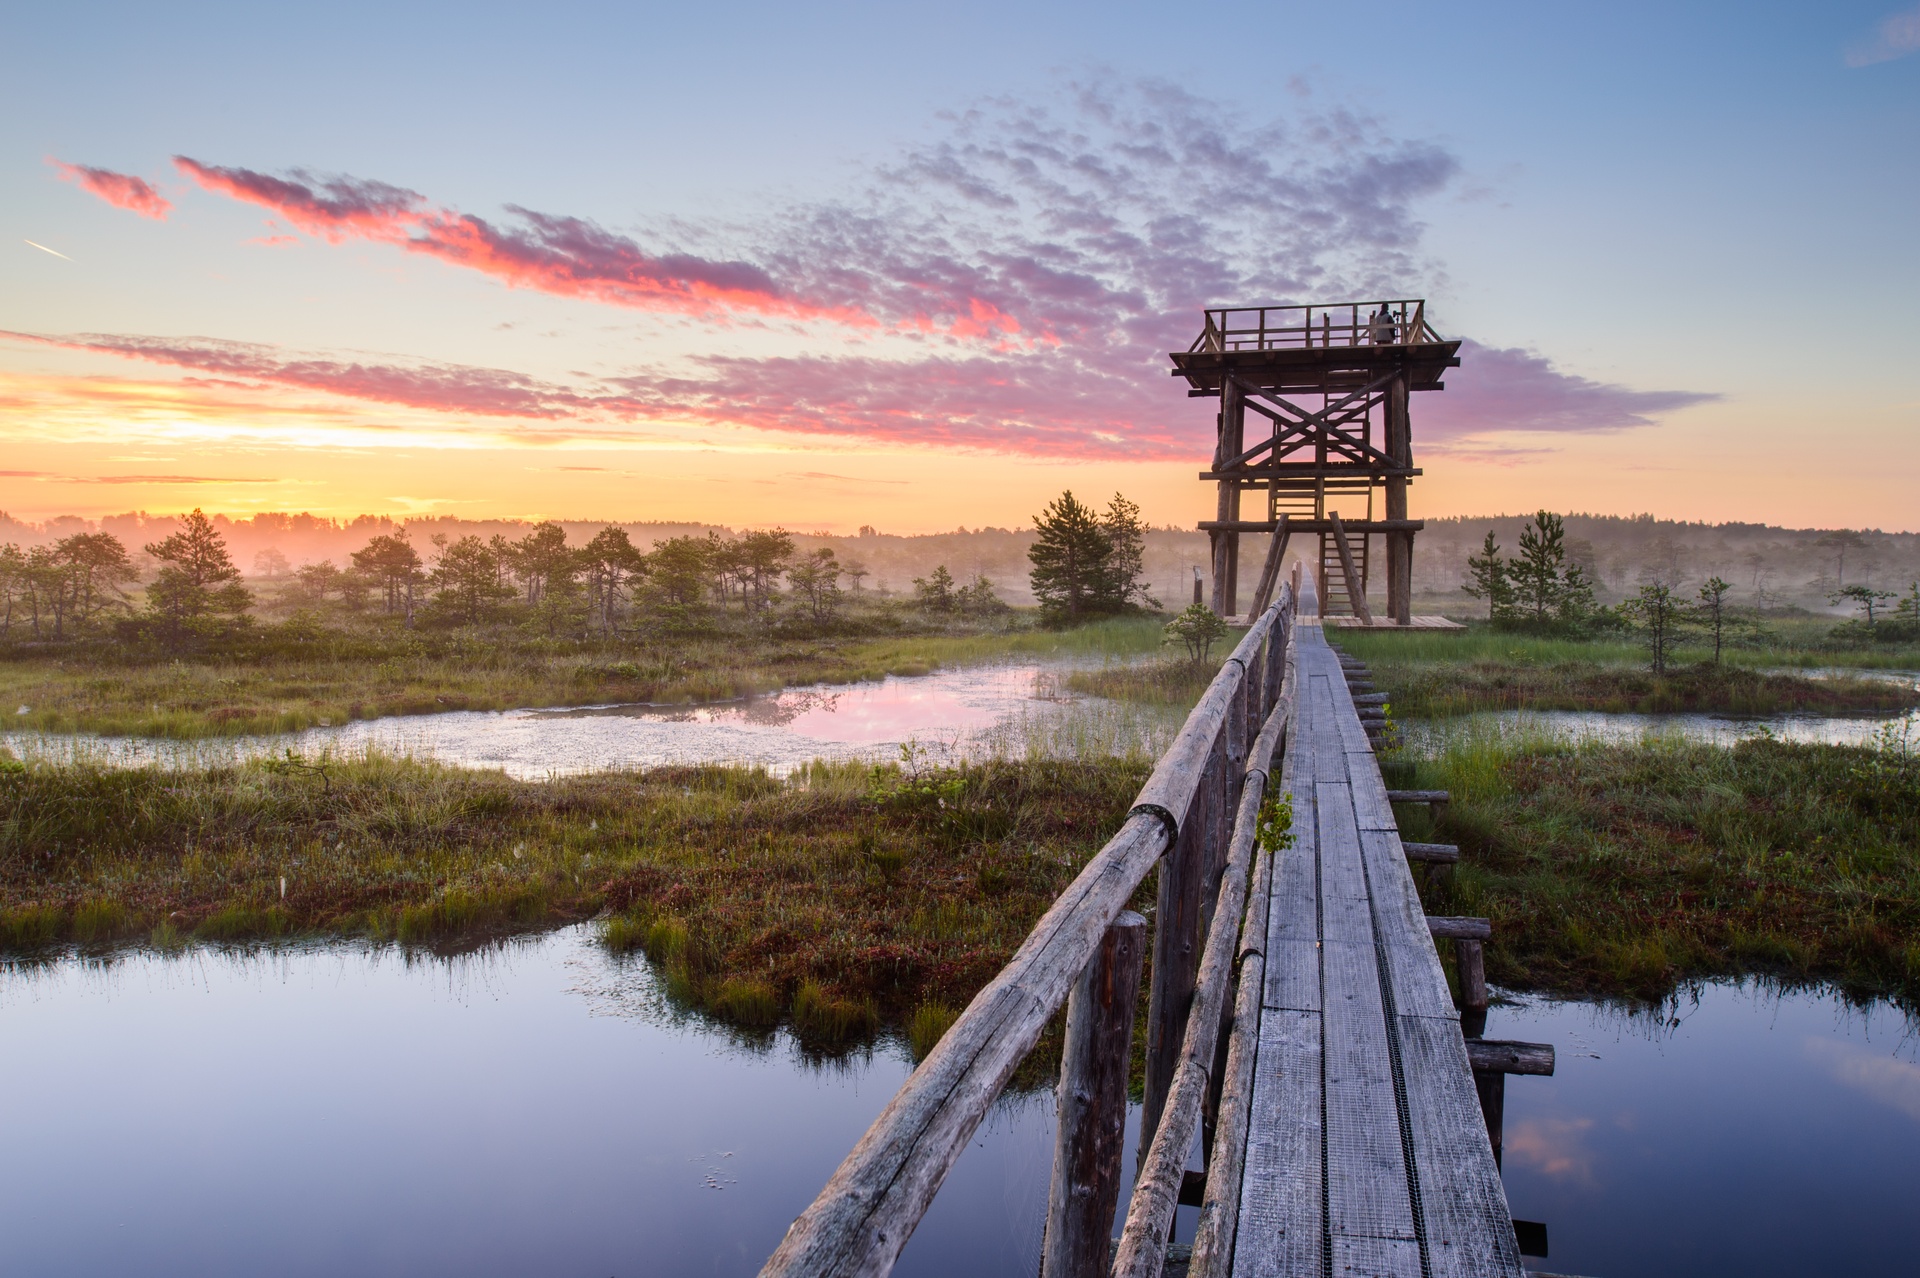 Sunrise over the bog with a wooden boardwalk and tower.